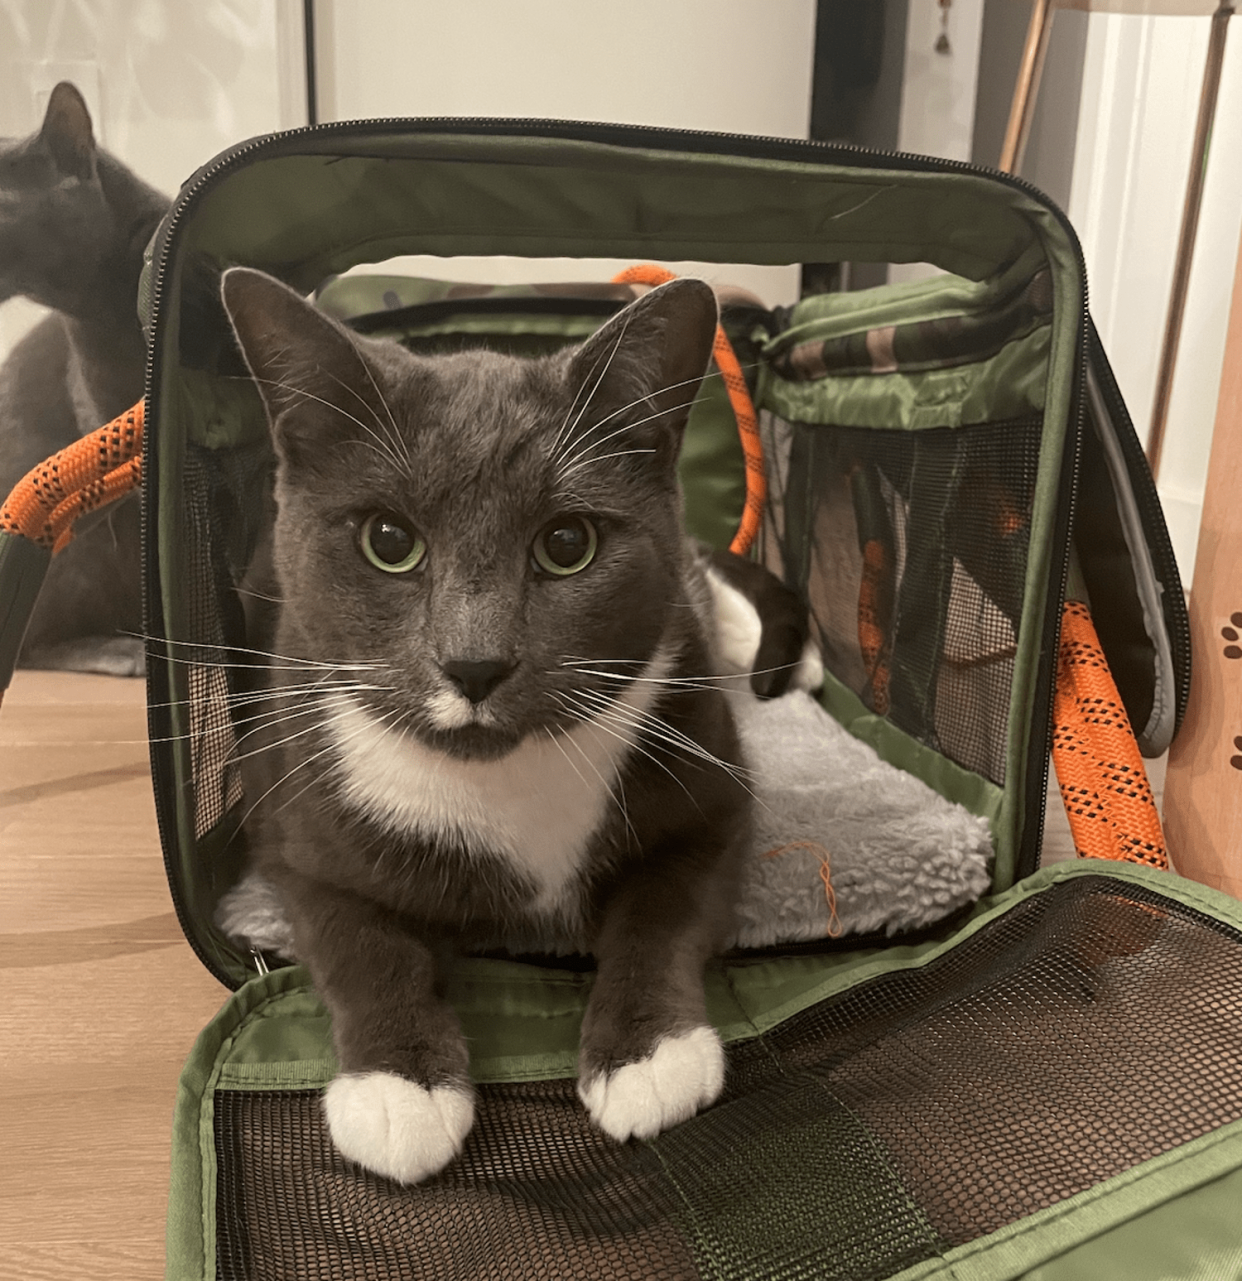 Roverlund's pet carrier is available in a large size, which is great for big cats like Enzo. (Courtesy Rebecca Rodriguez)